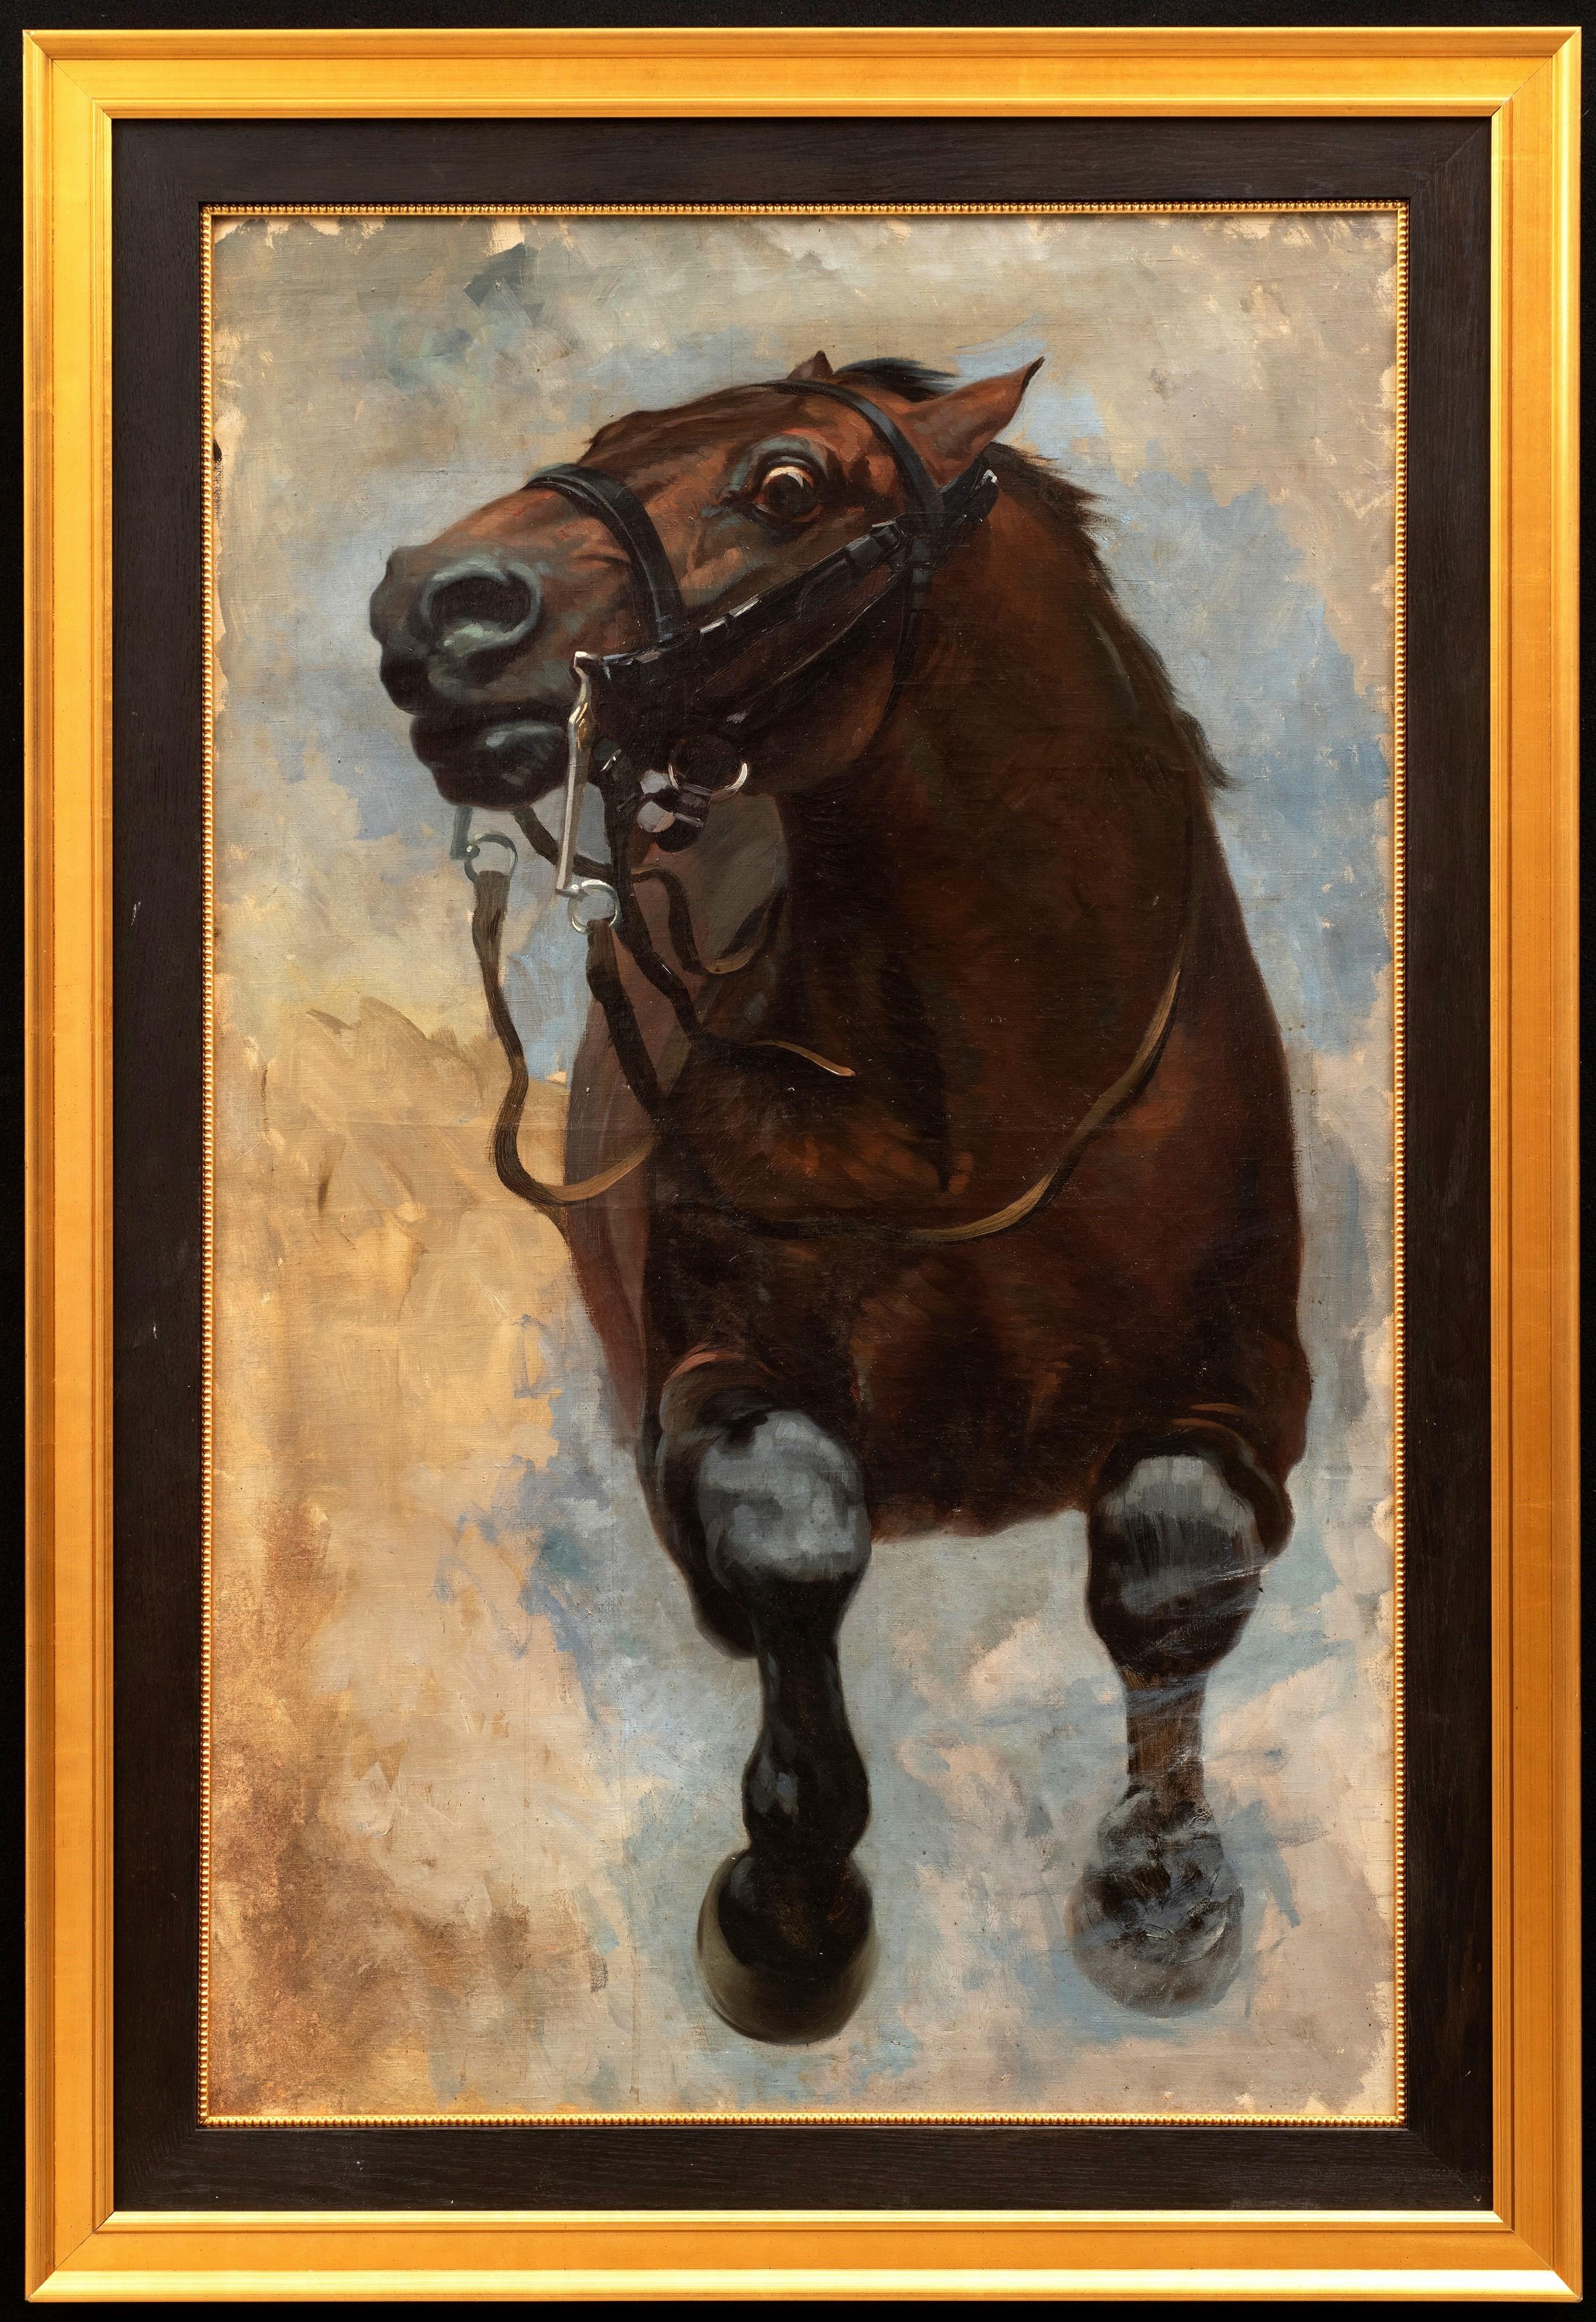 Victor Morelli Sánchez-Gil  Animal Painting - Antique Horse Painting "The Charging Stallion, 1897" Victor Morelli Sánchez-Gil